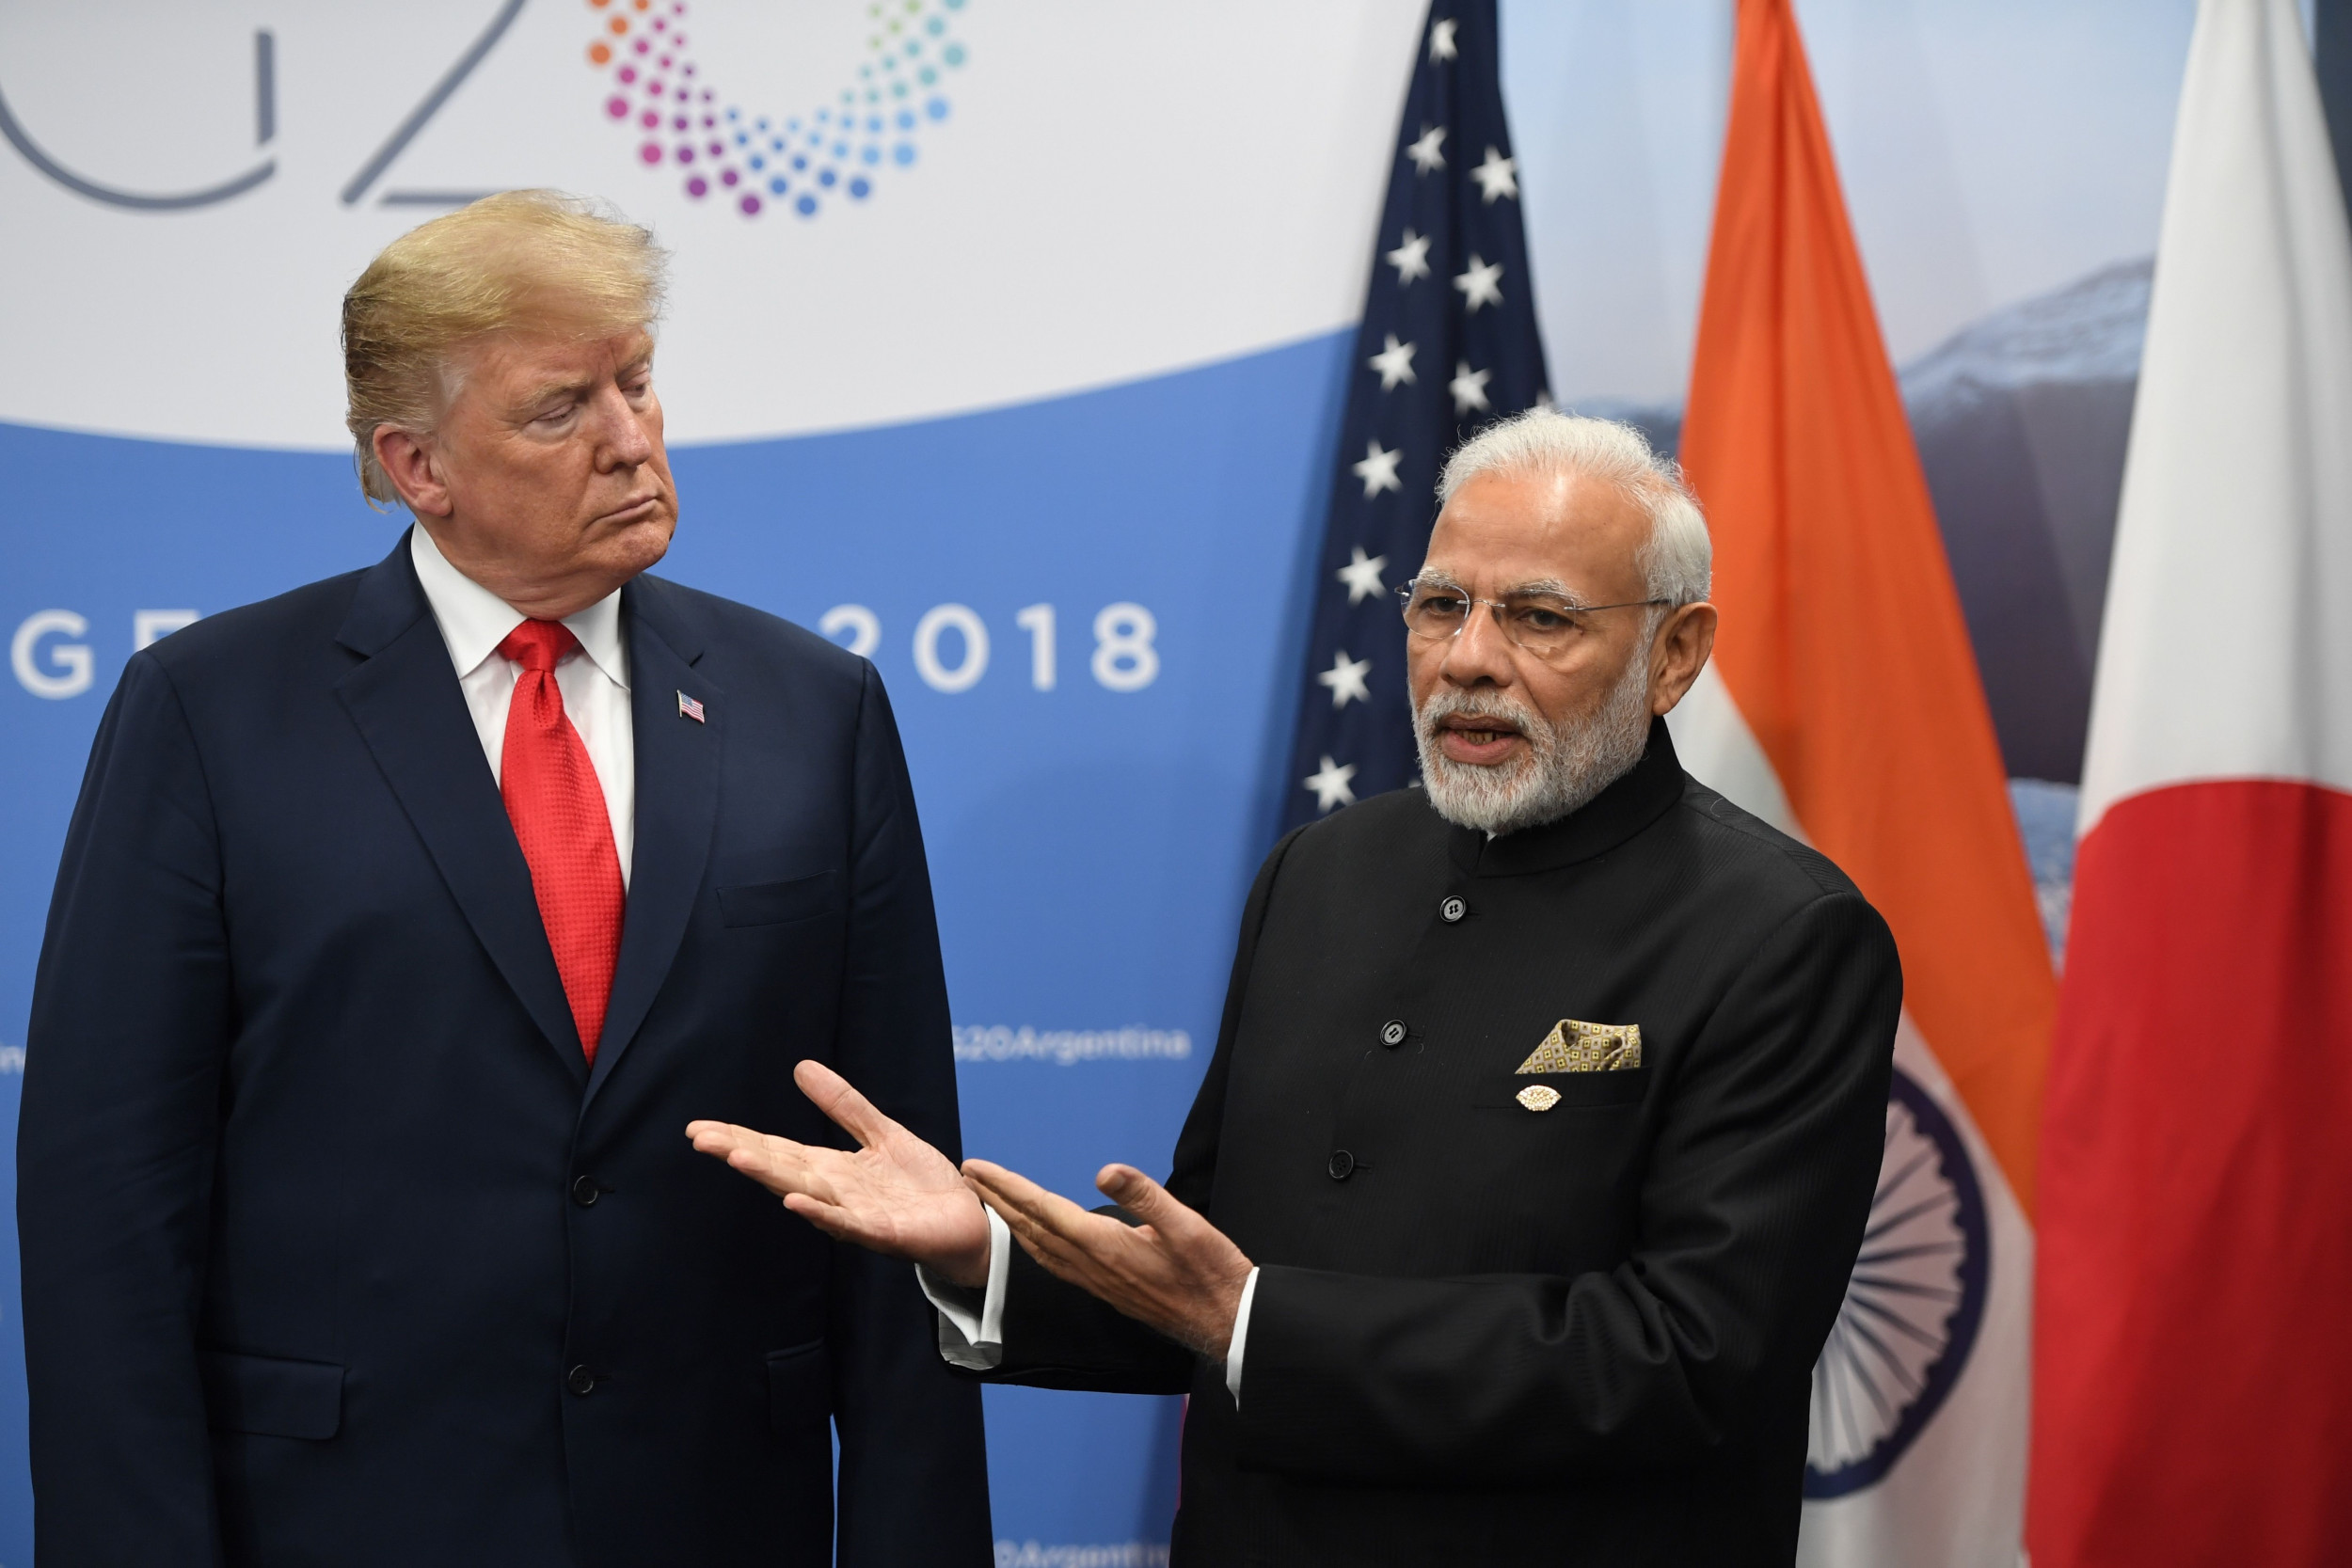 Donald Trump Is Engaged In A Low Intensity Trade War With India Analyst Says